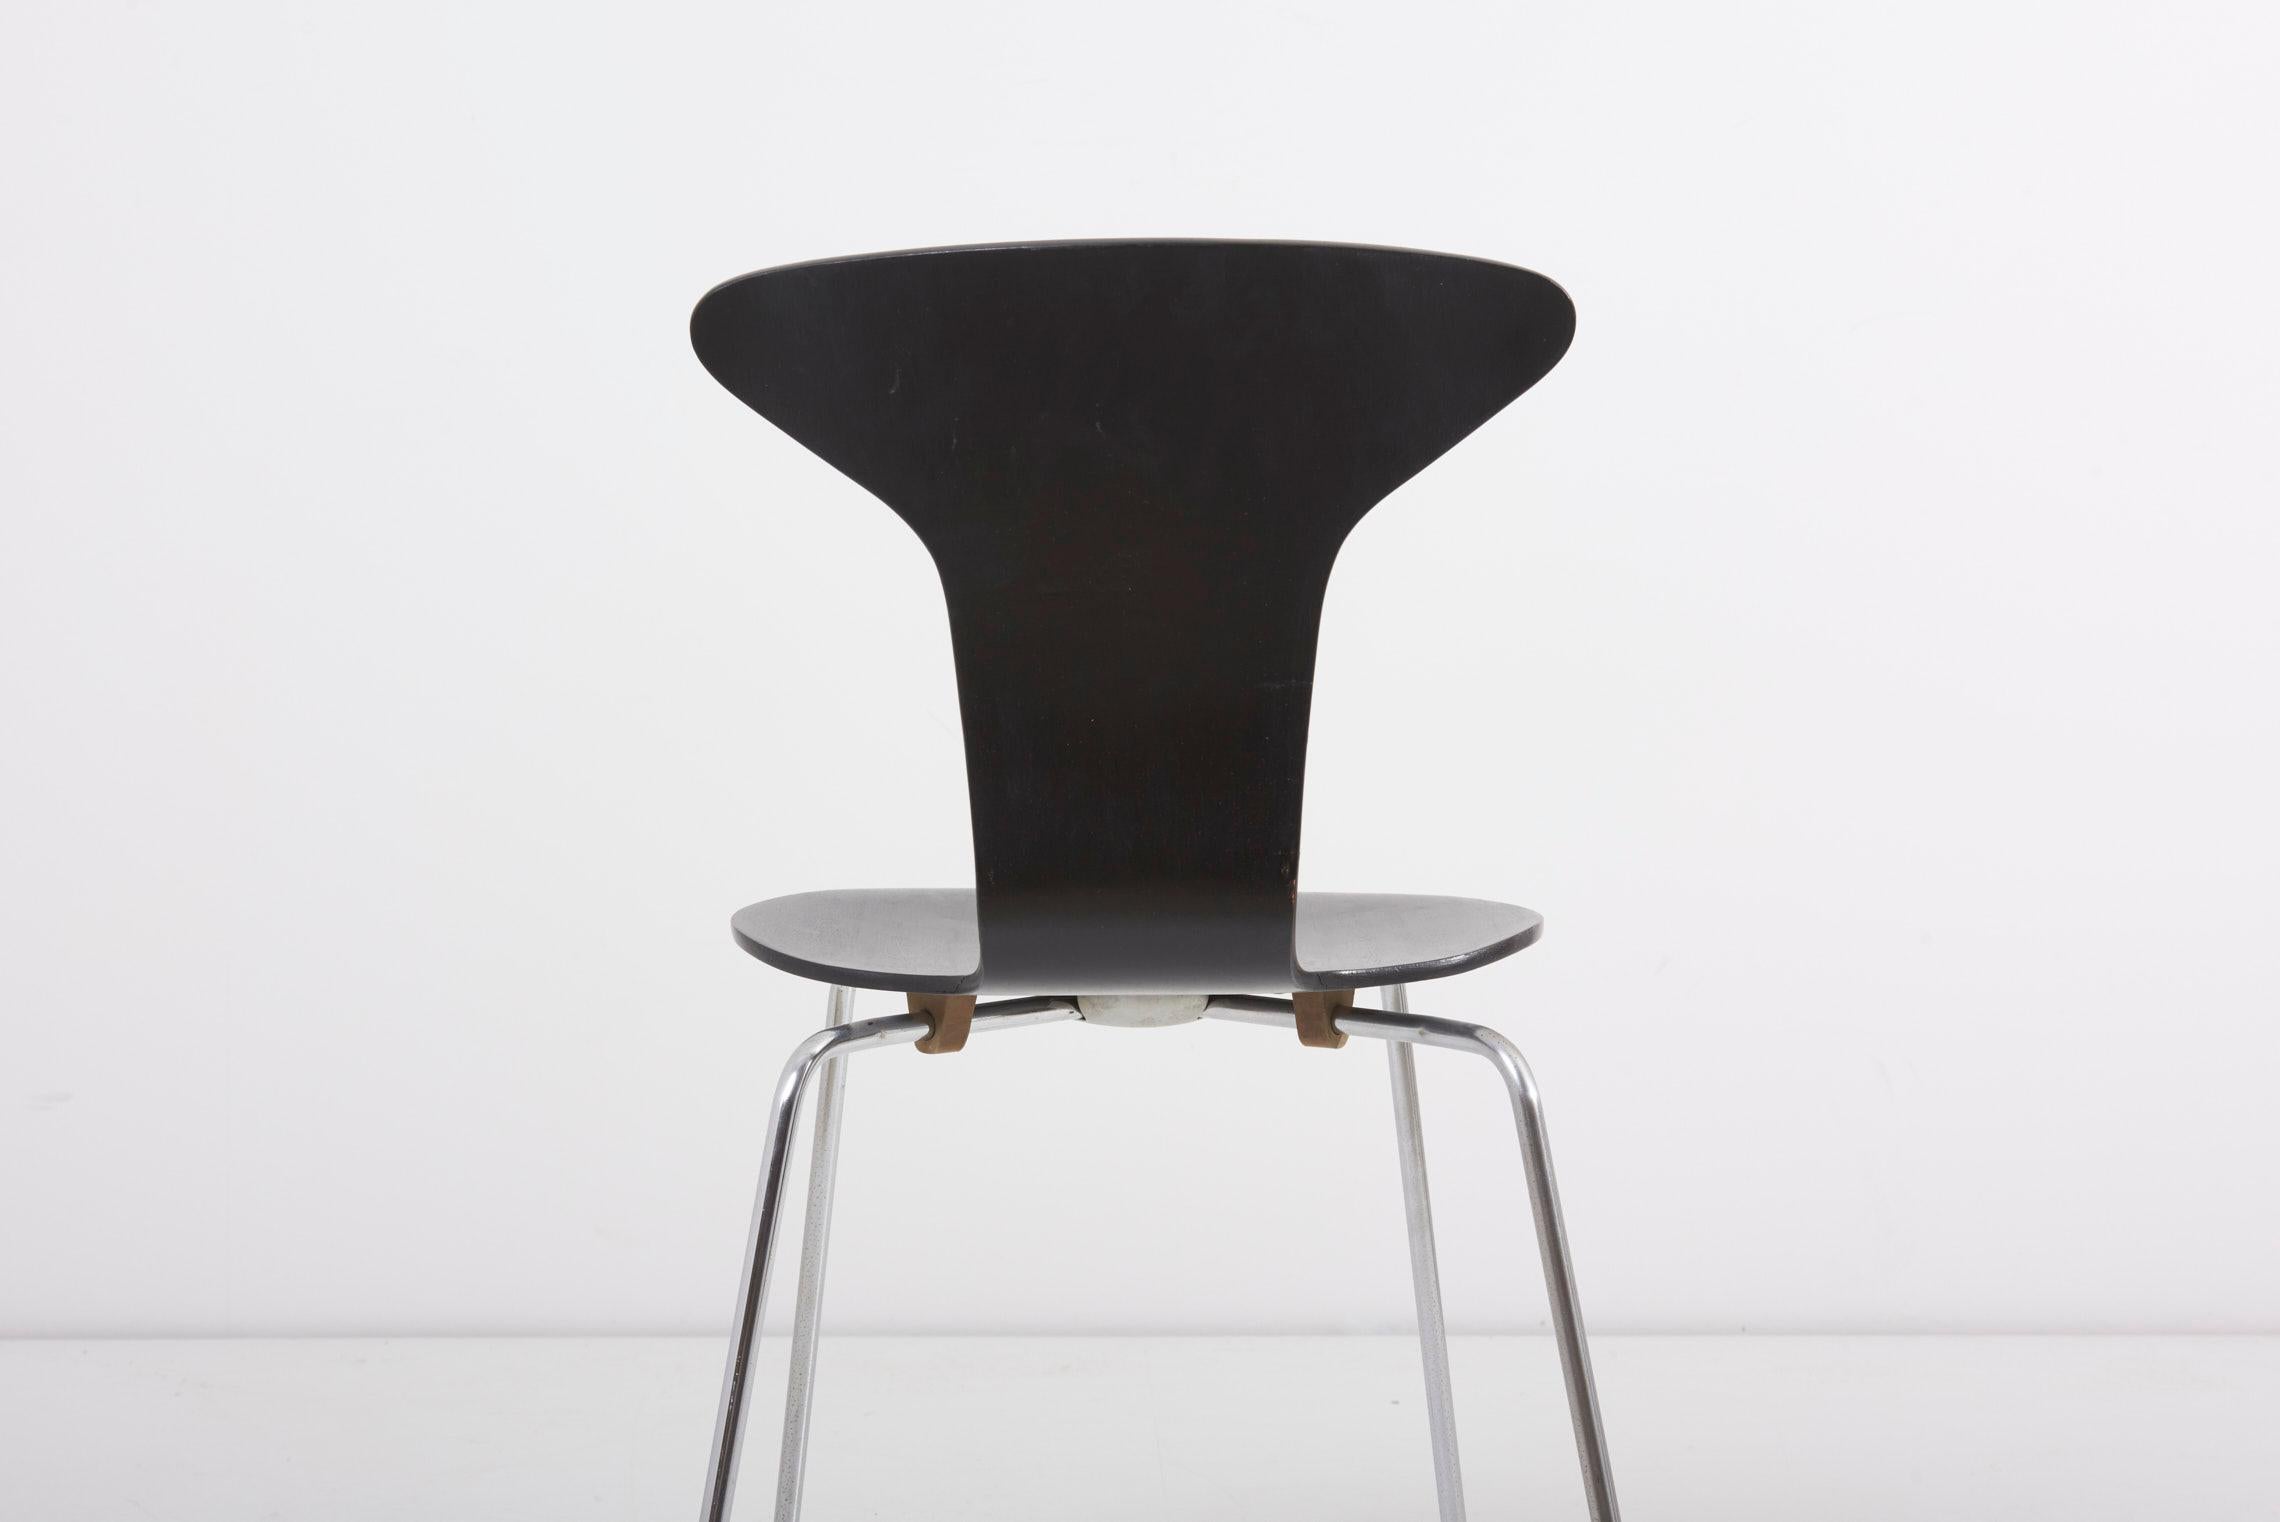 Set of 3 Mosquito Munkegård Dining Chairs by Arne Jacobsen, Denmark, 1950s For Sale 1